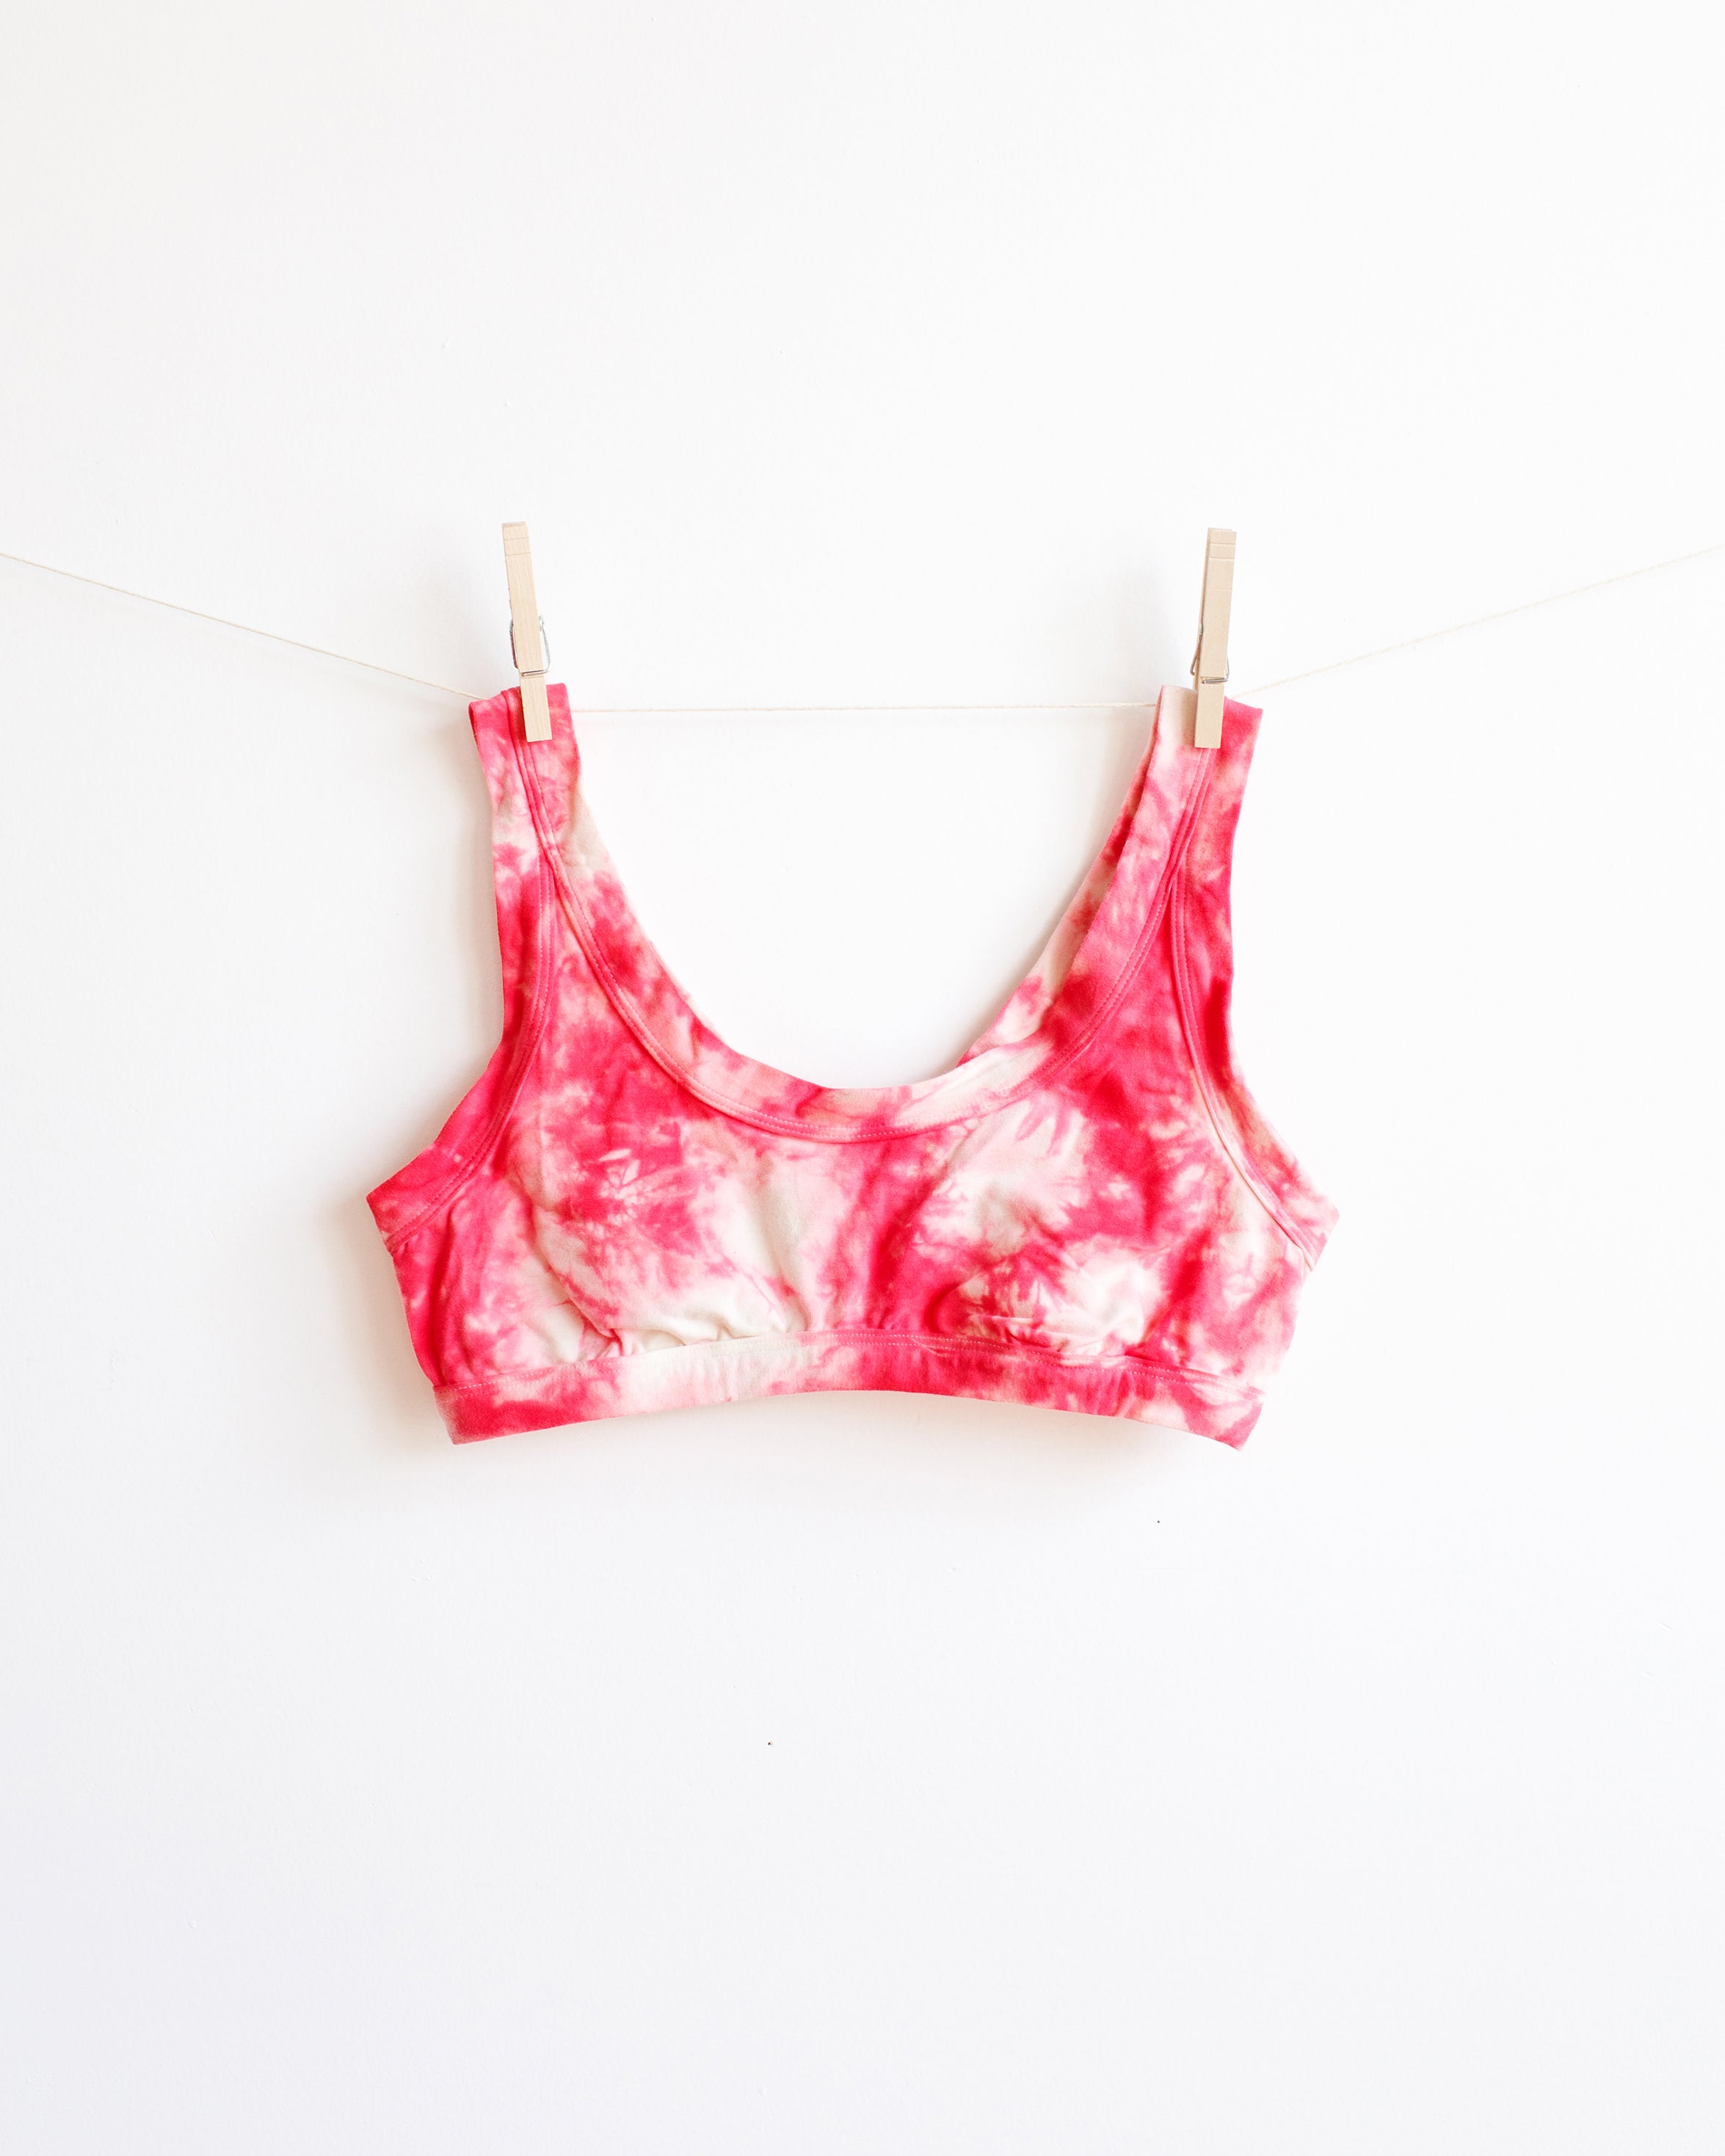 A Thunderpants Bralette with red and white scrunch dye hanging on a white backdrop.